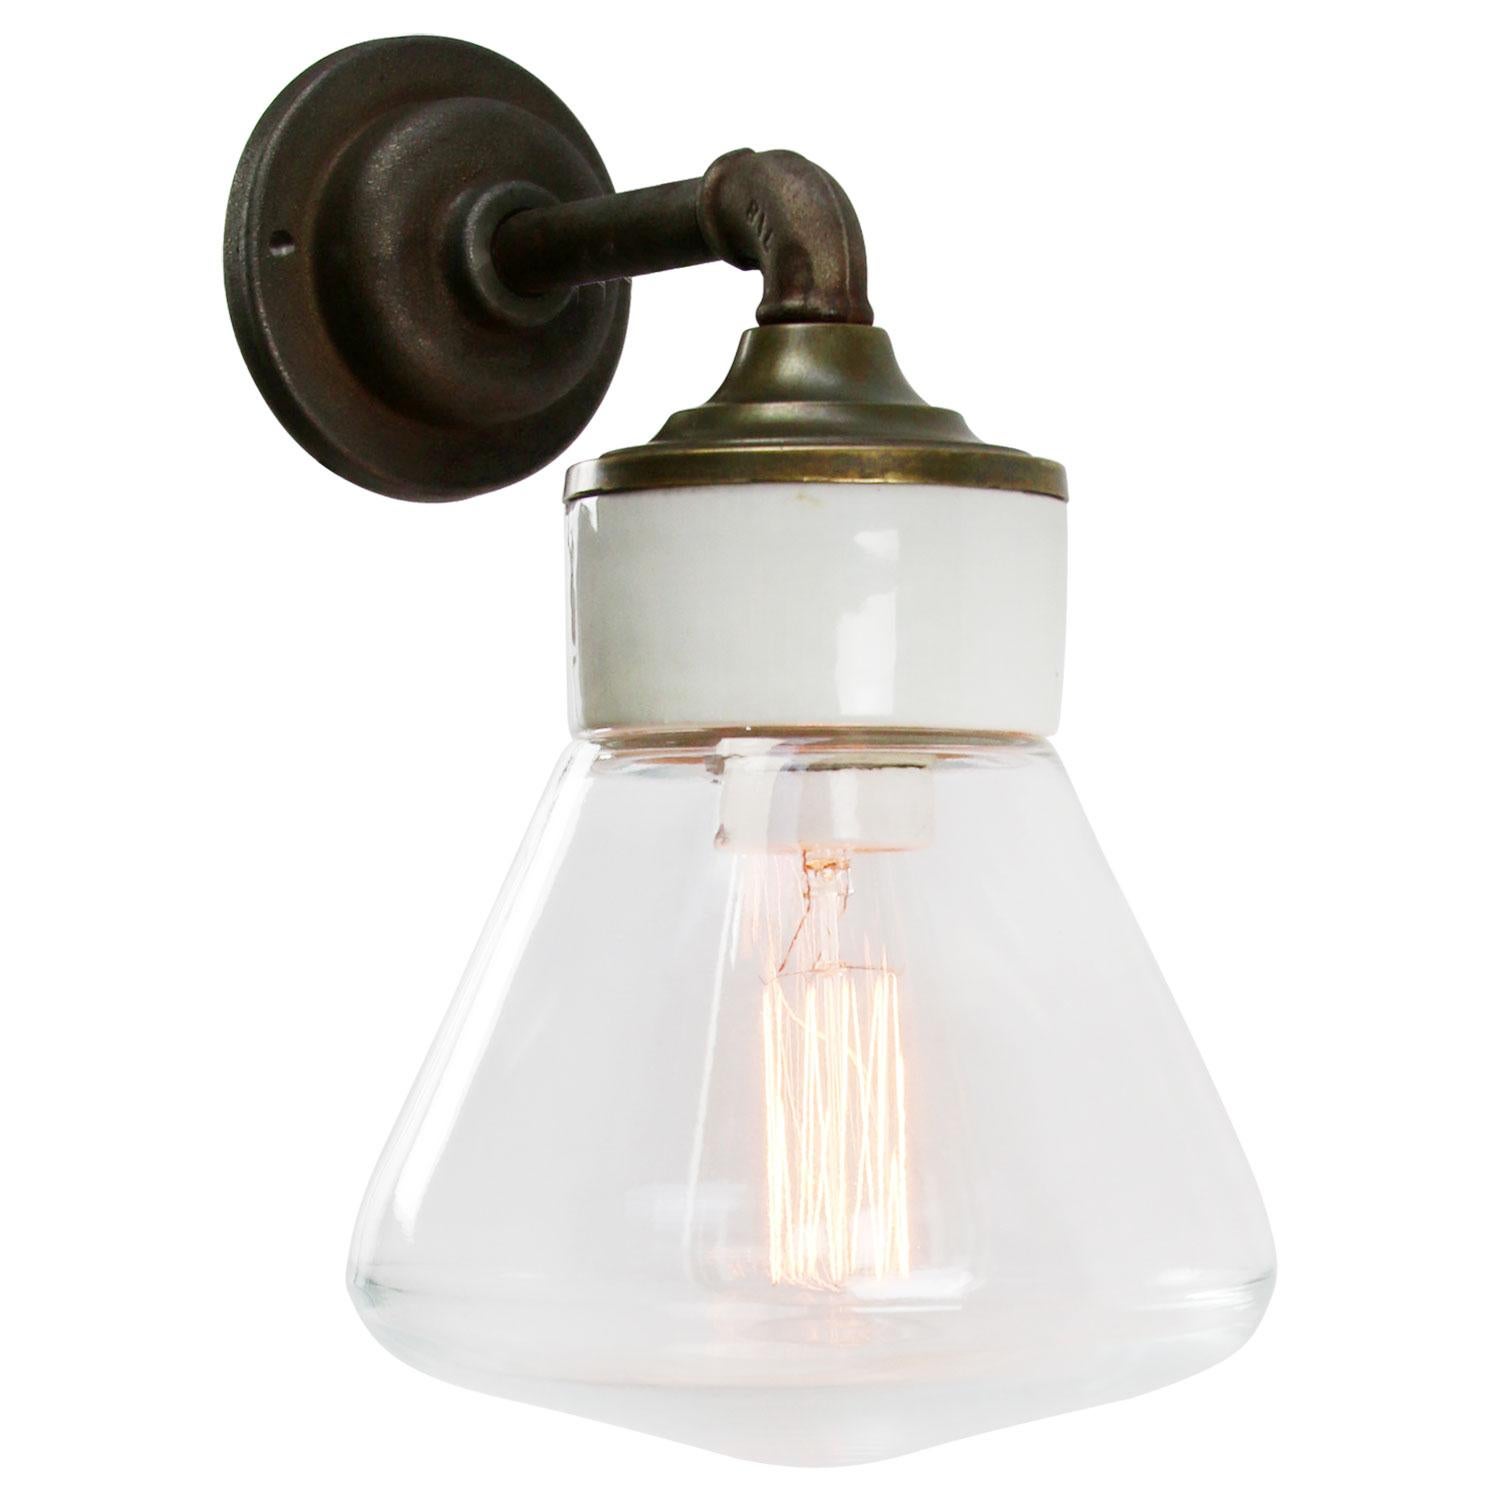 Porcelain industrial wall lamp.
White porcelain, brass and cast iron
Clear glass.
2 conductors, no ground.

Diameter wall mount 10.5 cm / 4”.
2 holes to secure.

For use inside only

Weight: 2.05 kg / 4.5 lb

Priced per individual item. All lamps